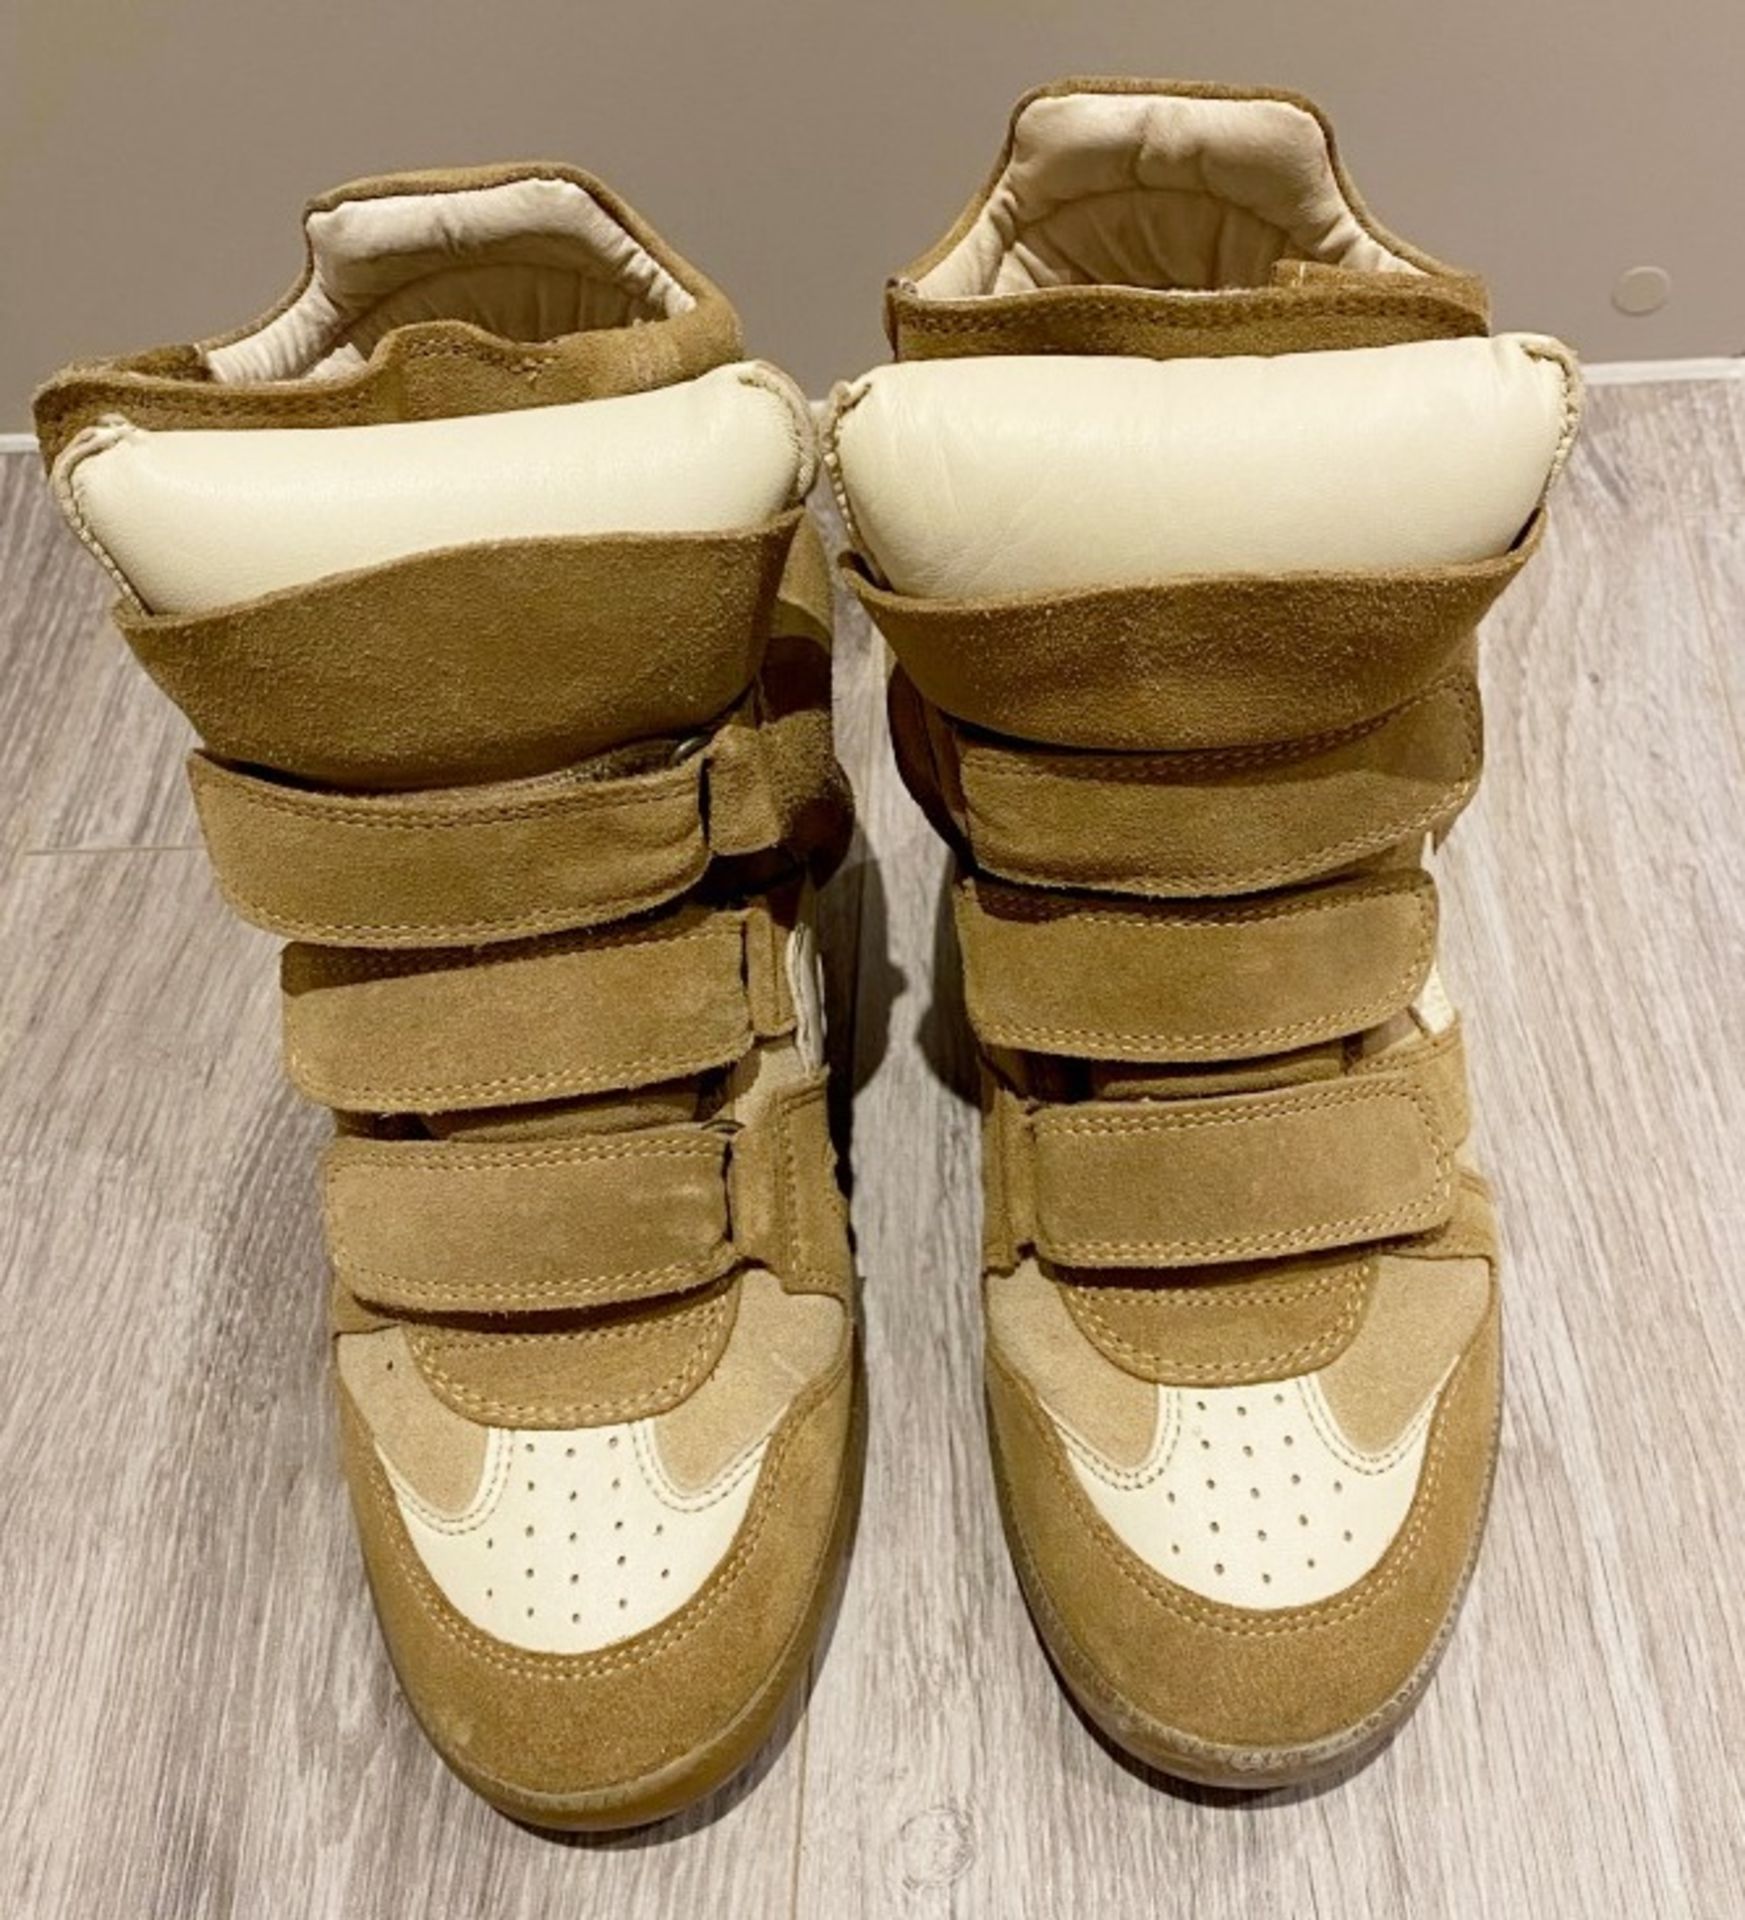 1 x Pair Of Genuine Isabel Marant Boots In Tan - Size: 36 - Preowned in Good Condition - Ref: LOT40 - Image 4 of 4